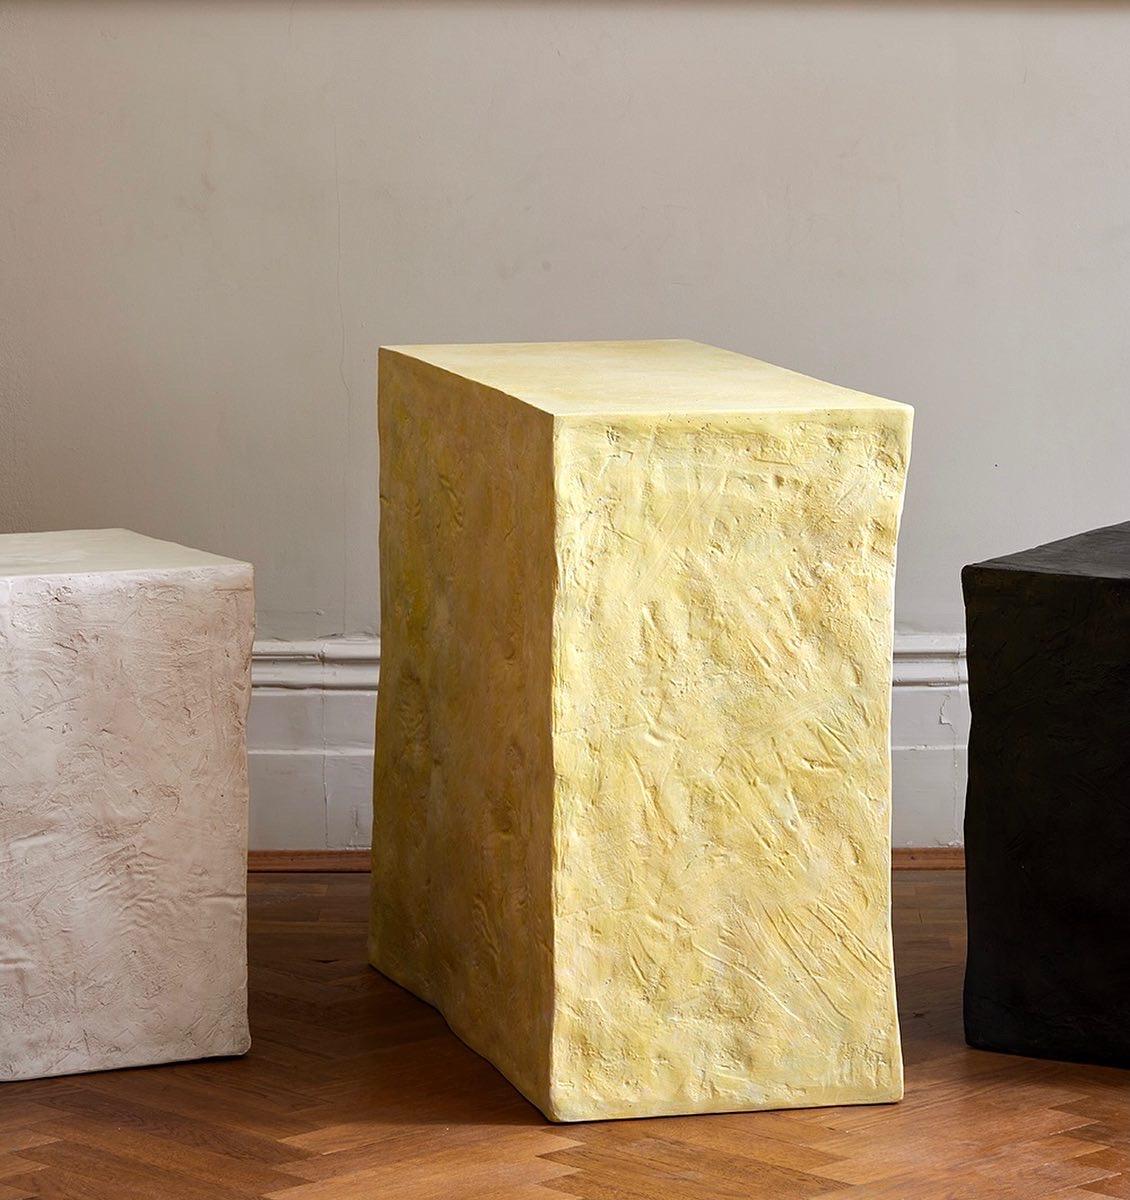 The Manhattan cuboid is a deceptively simple side table, created by artist-designer Margit Wittig that can double up as a sculptural seat.
It replicates a shape which Margit is fond of and has previously used in lighting on a smaller scale, a